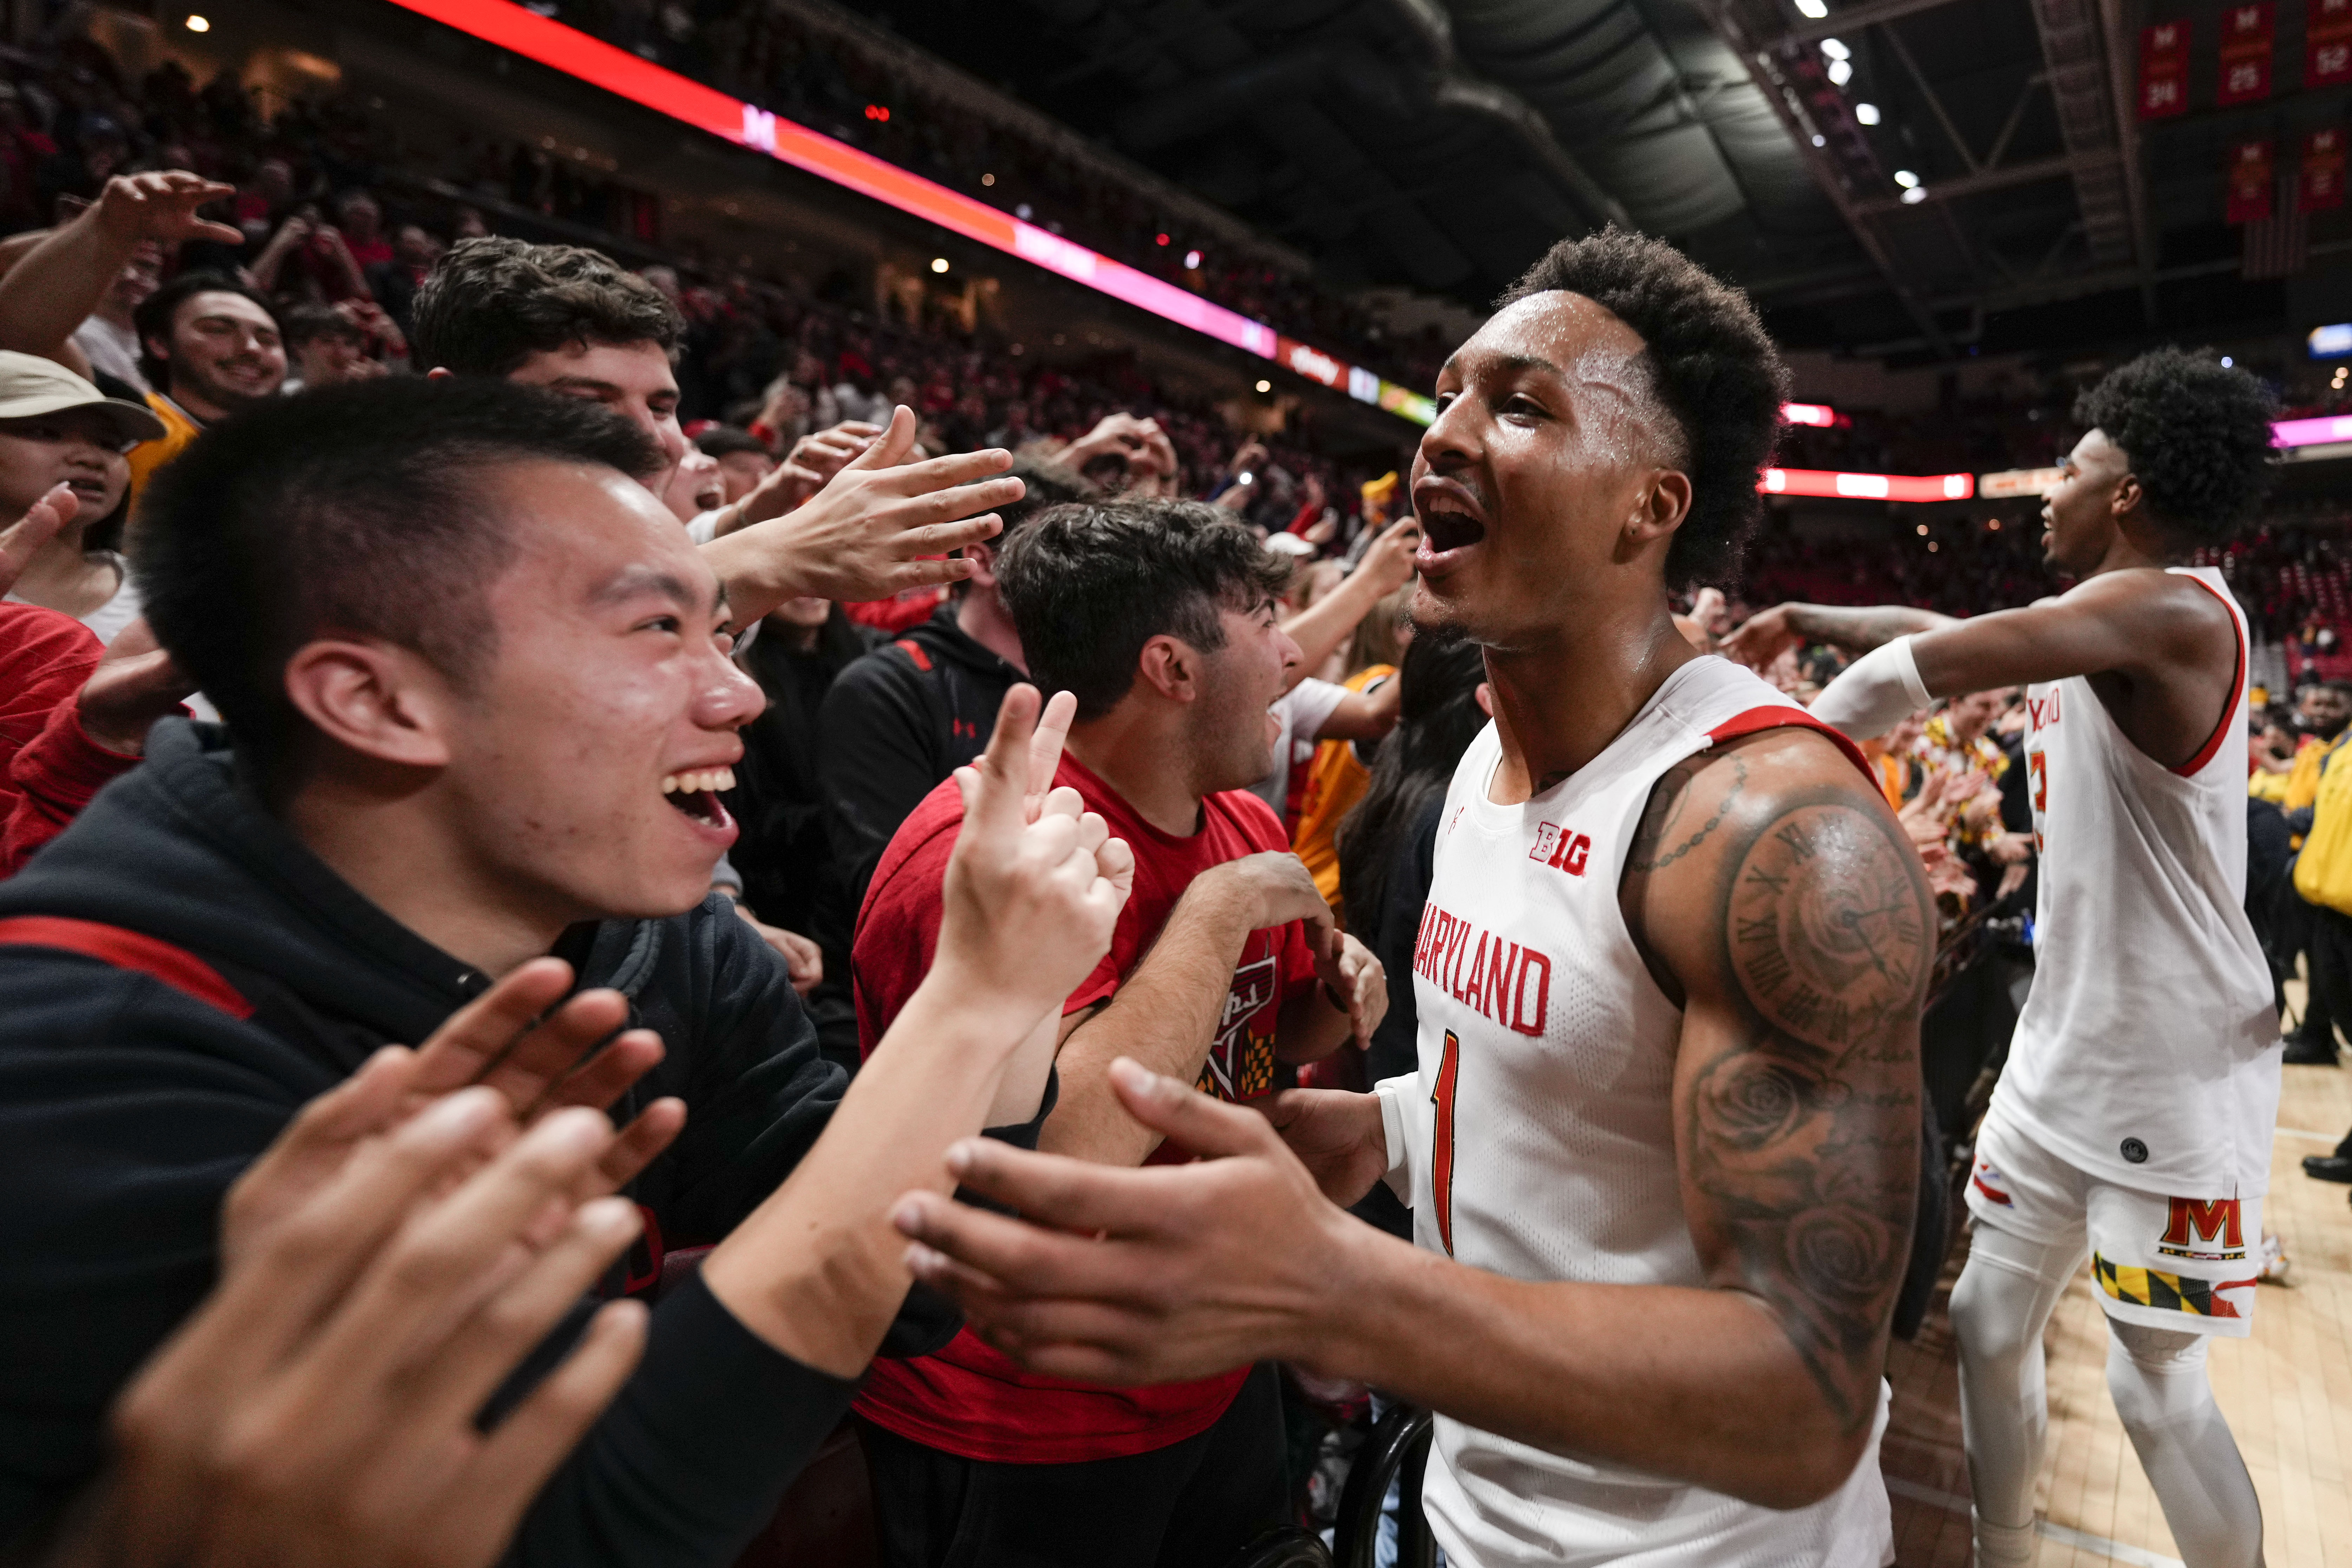 Maryland replaces Northwestern in the latest USA TODAY Sports Coaches Poll